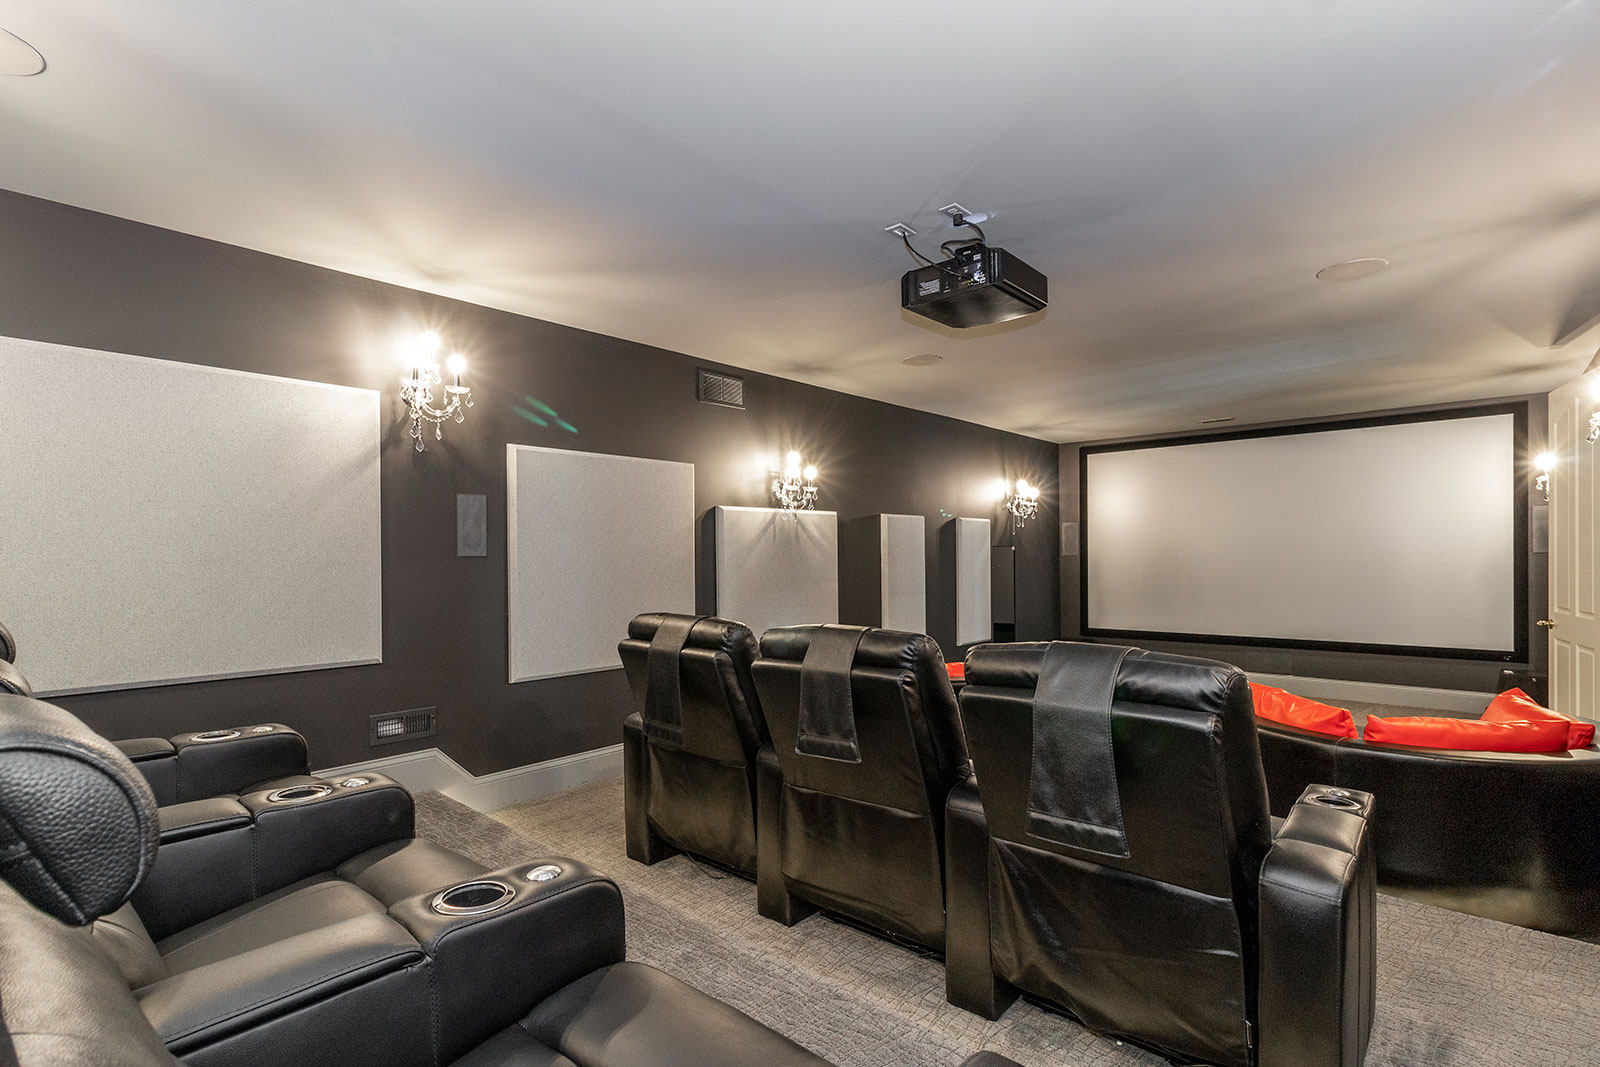 Beautiful Media Room with Tiered Theater Seating and Luxurious Leather Chairs Sound Deadening Acoustic Wall Panels Tower Speakers Projector Ground Mood Lighting Thomas Theater